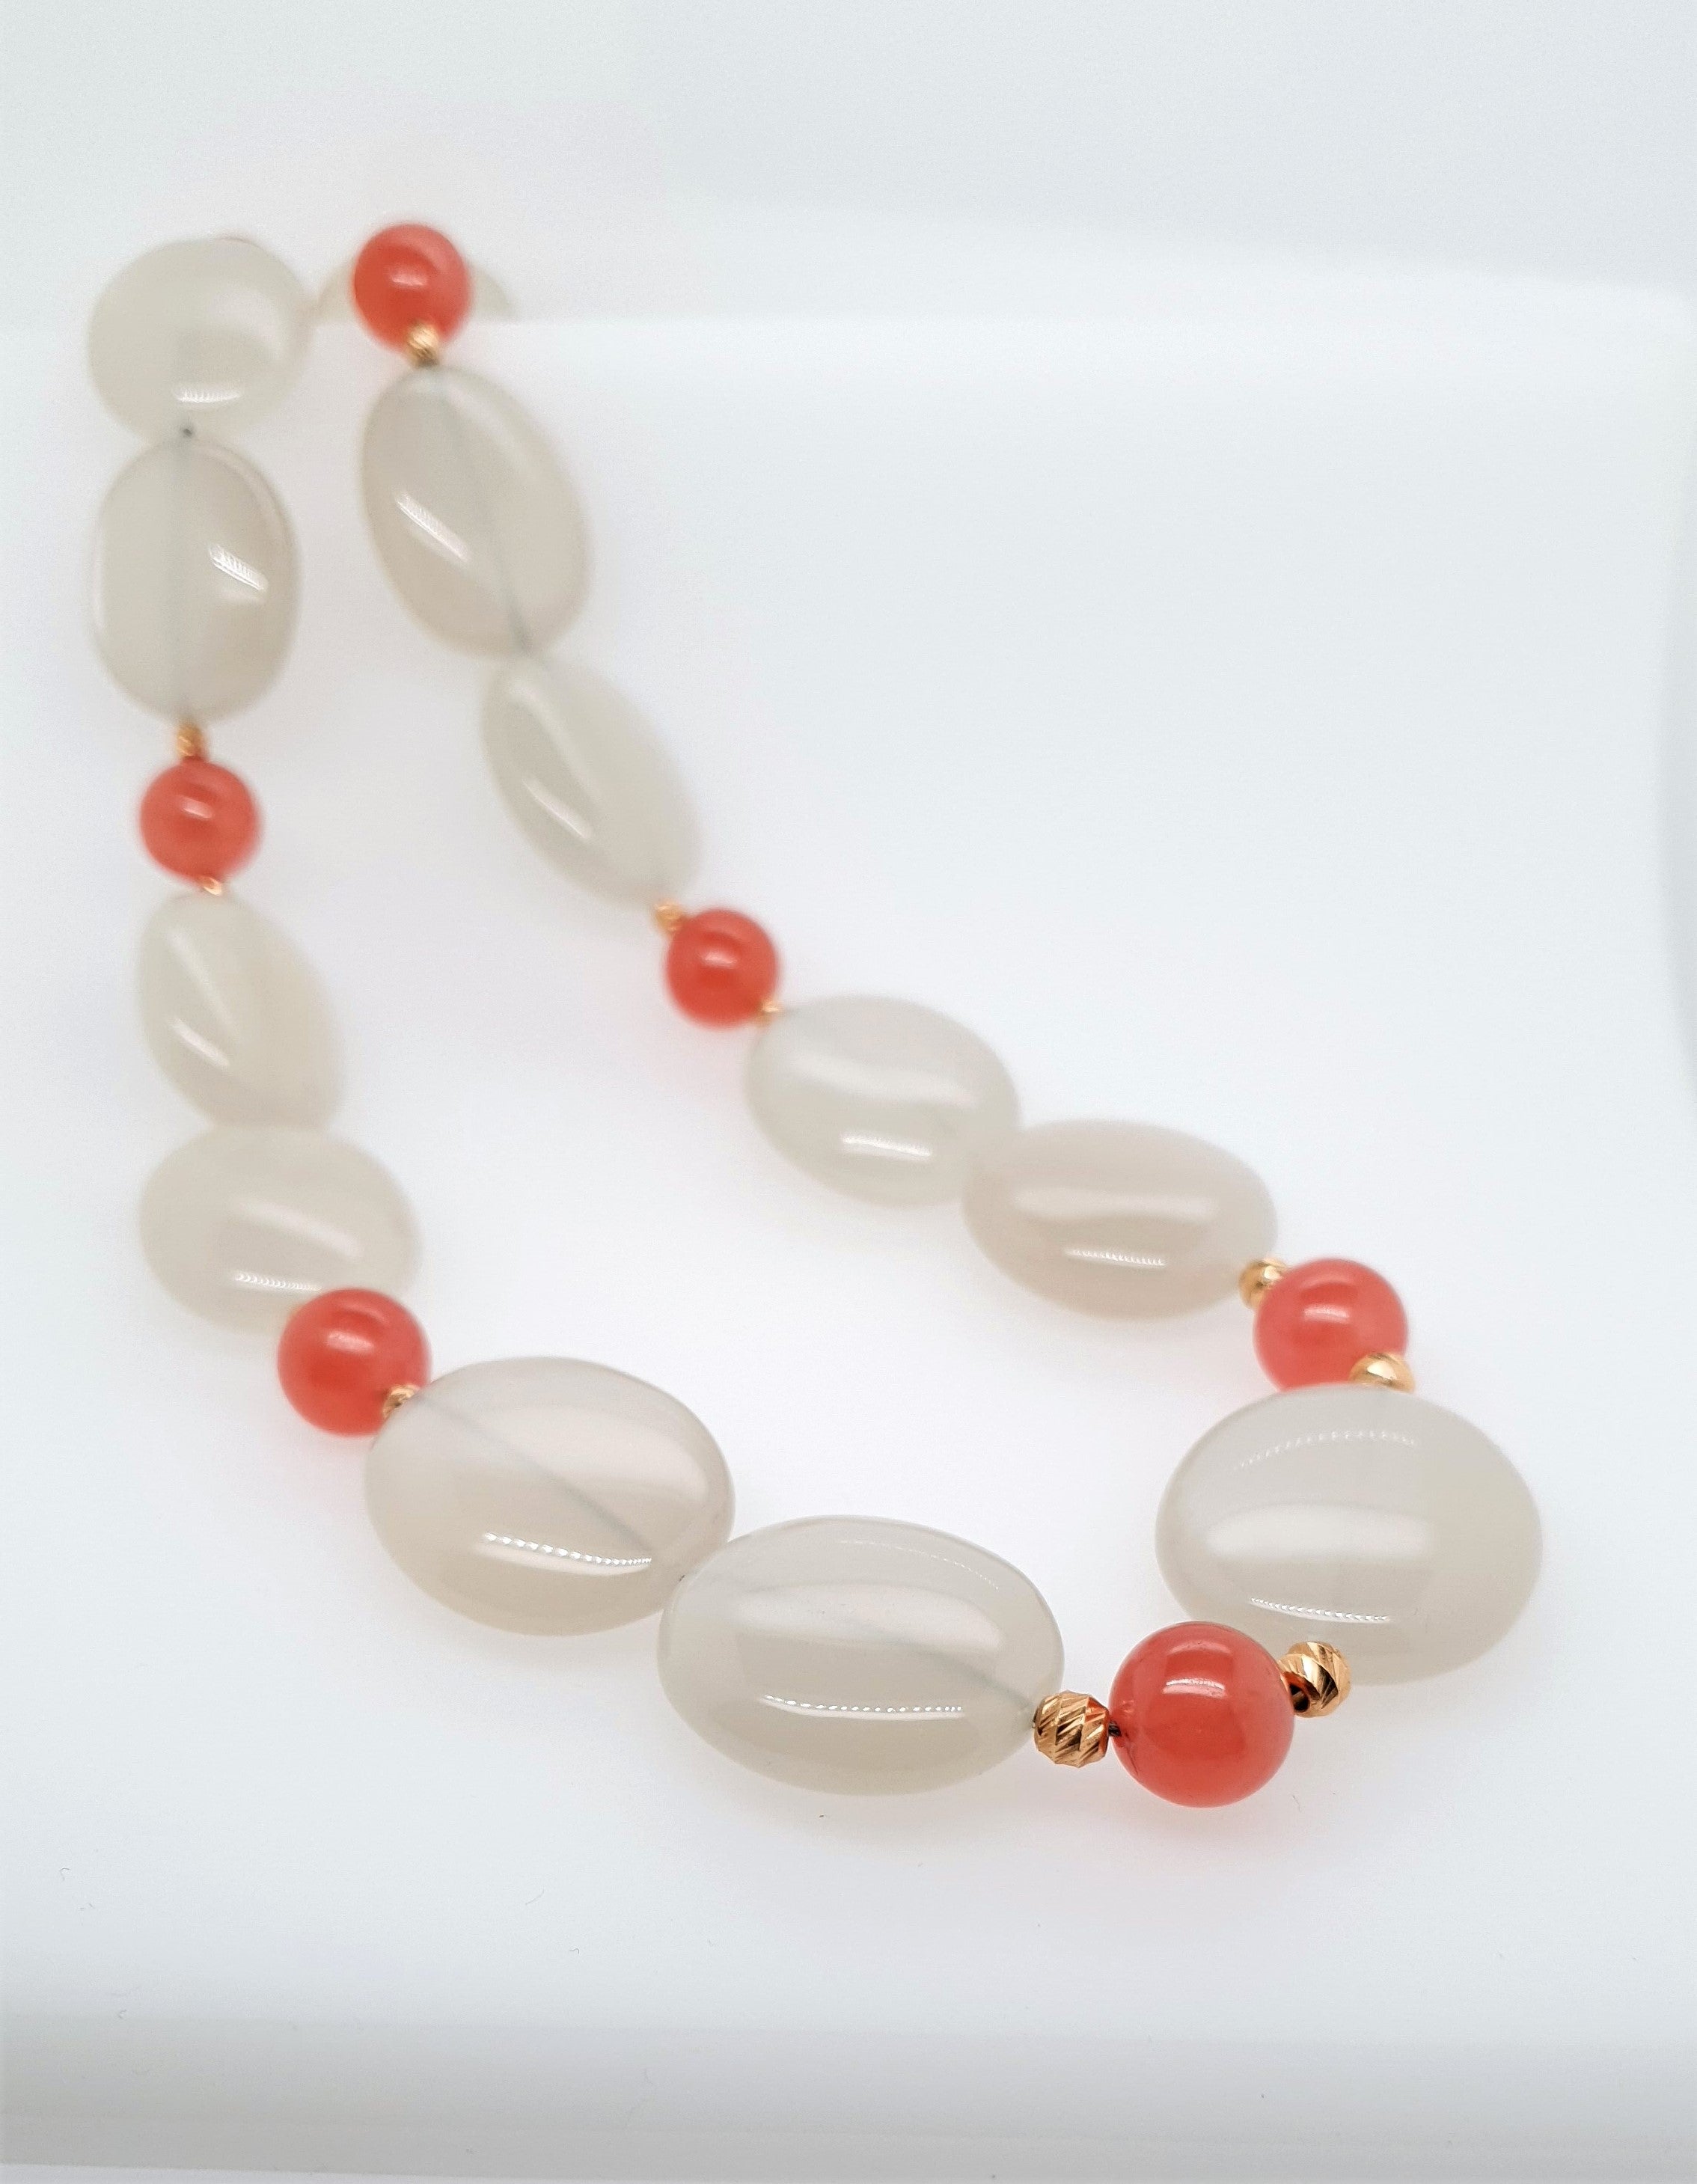 This natural grey big size baroque Moonstones with high quality Rhodochrosite round beads and 18 Carat Rose Gold is totally handmade.
Hand cutting as well as goldwork are made in German quality. The screw clasp holds the necklace securely around the